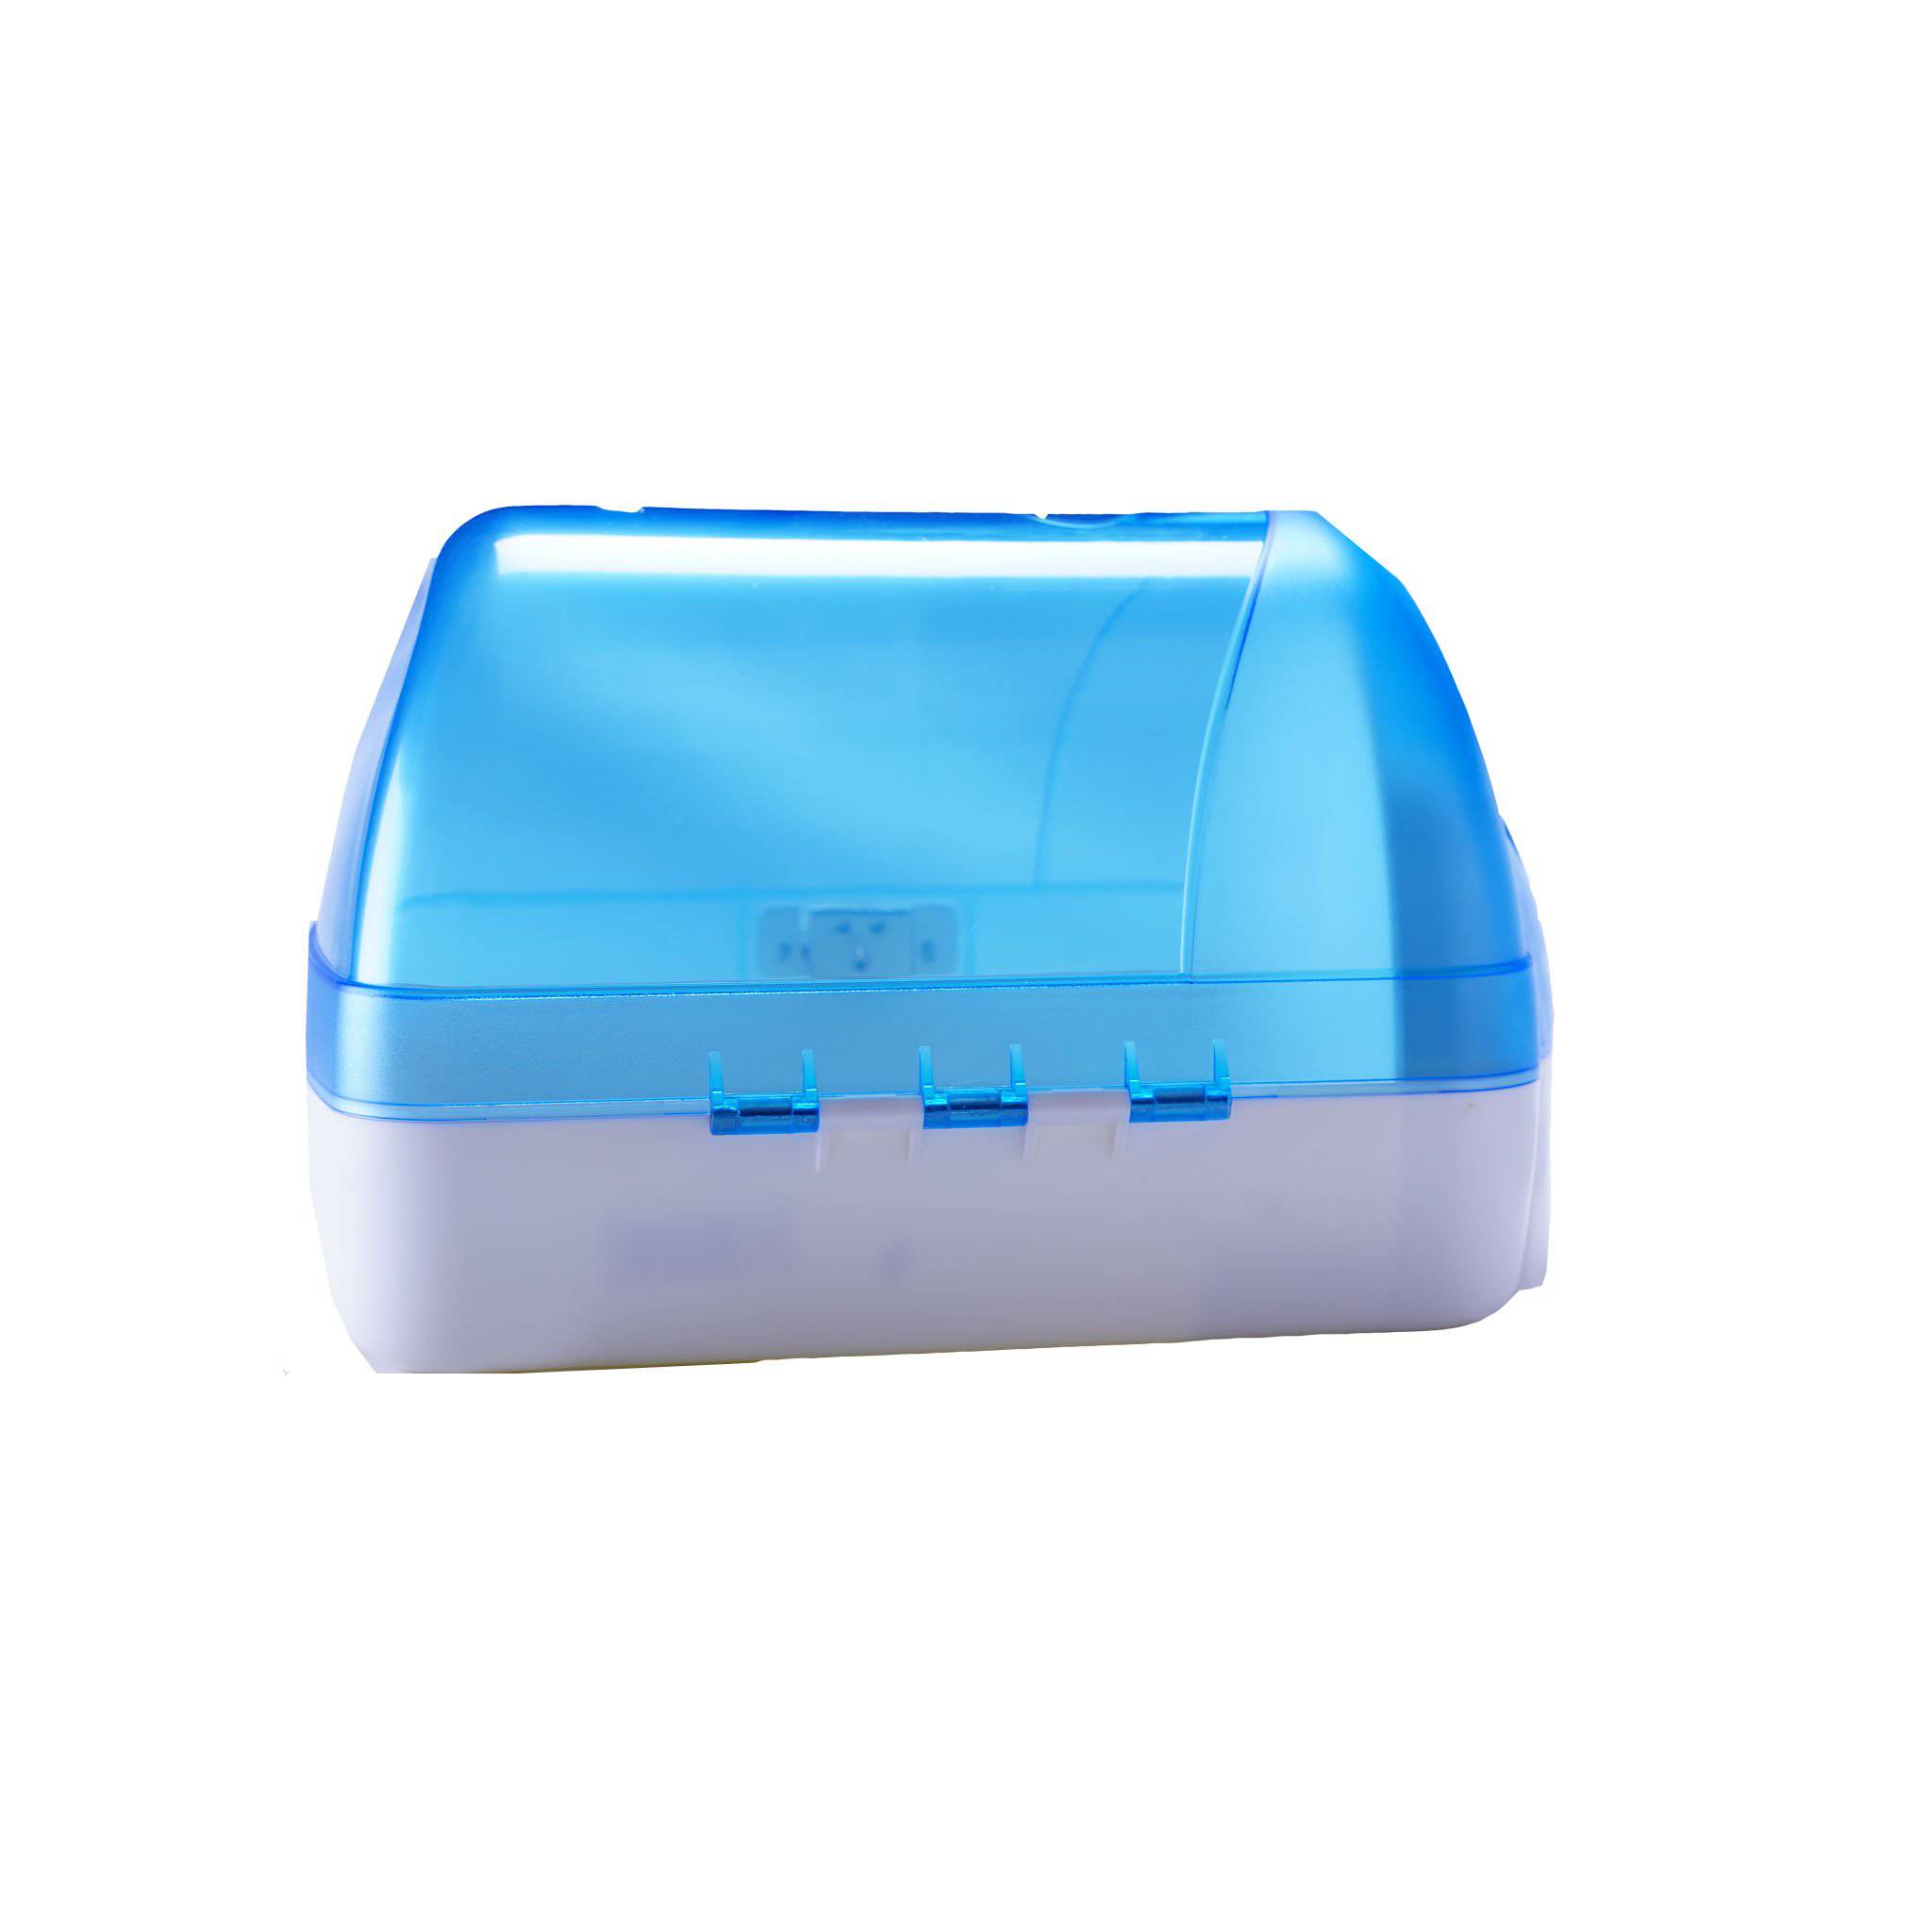 1 Piece Maxi Roll Dispenser with Tight Hole